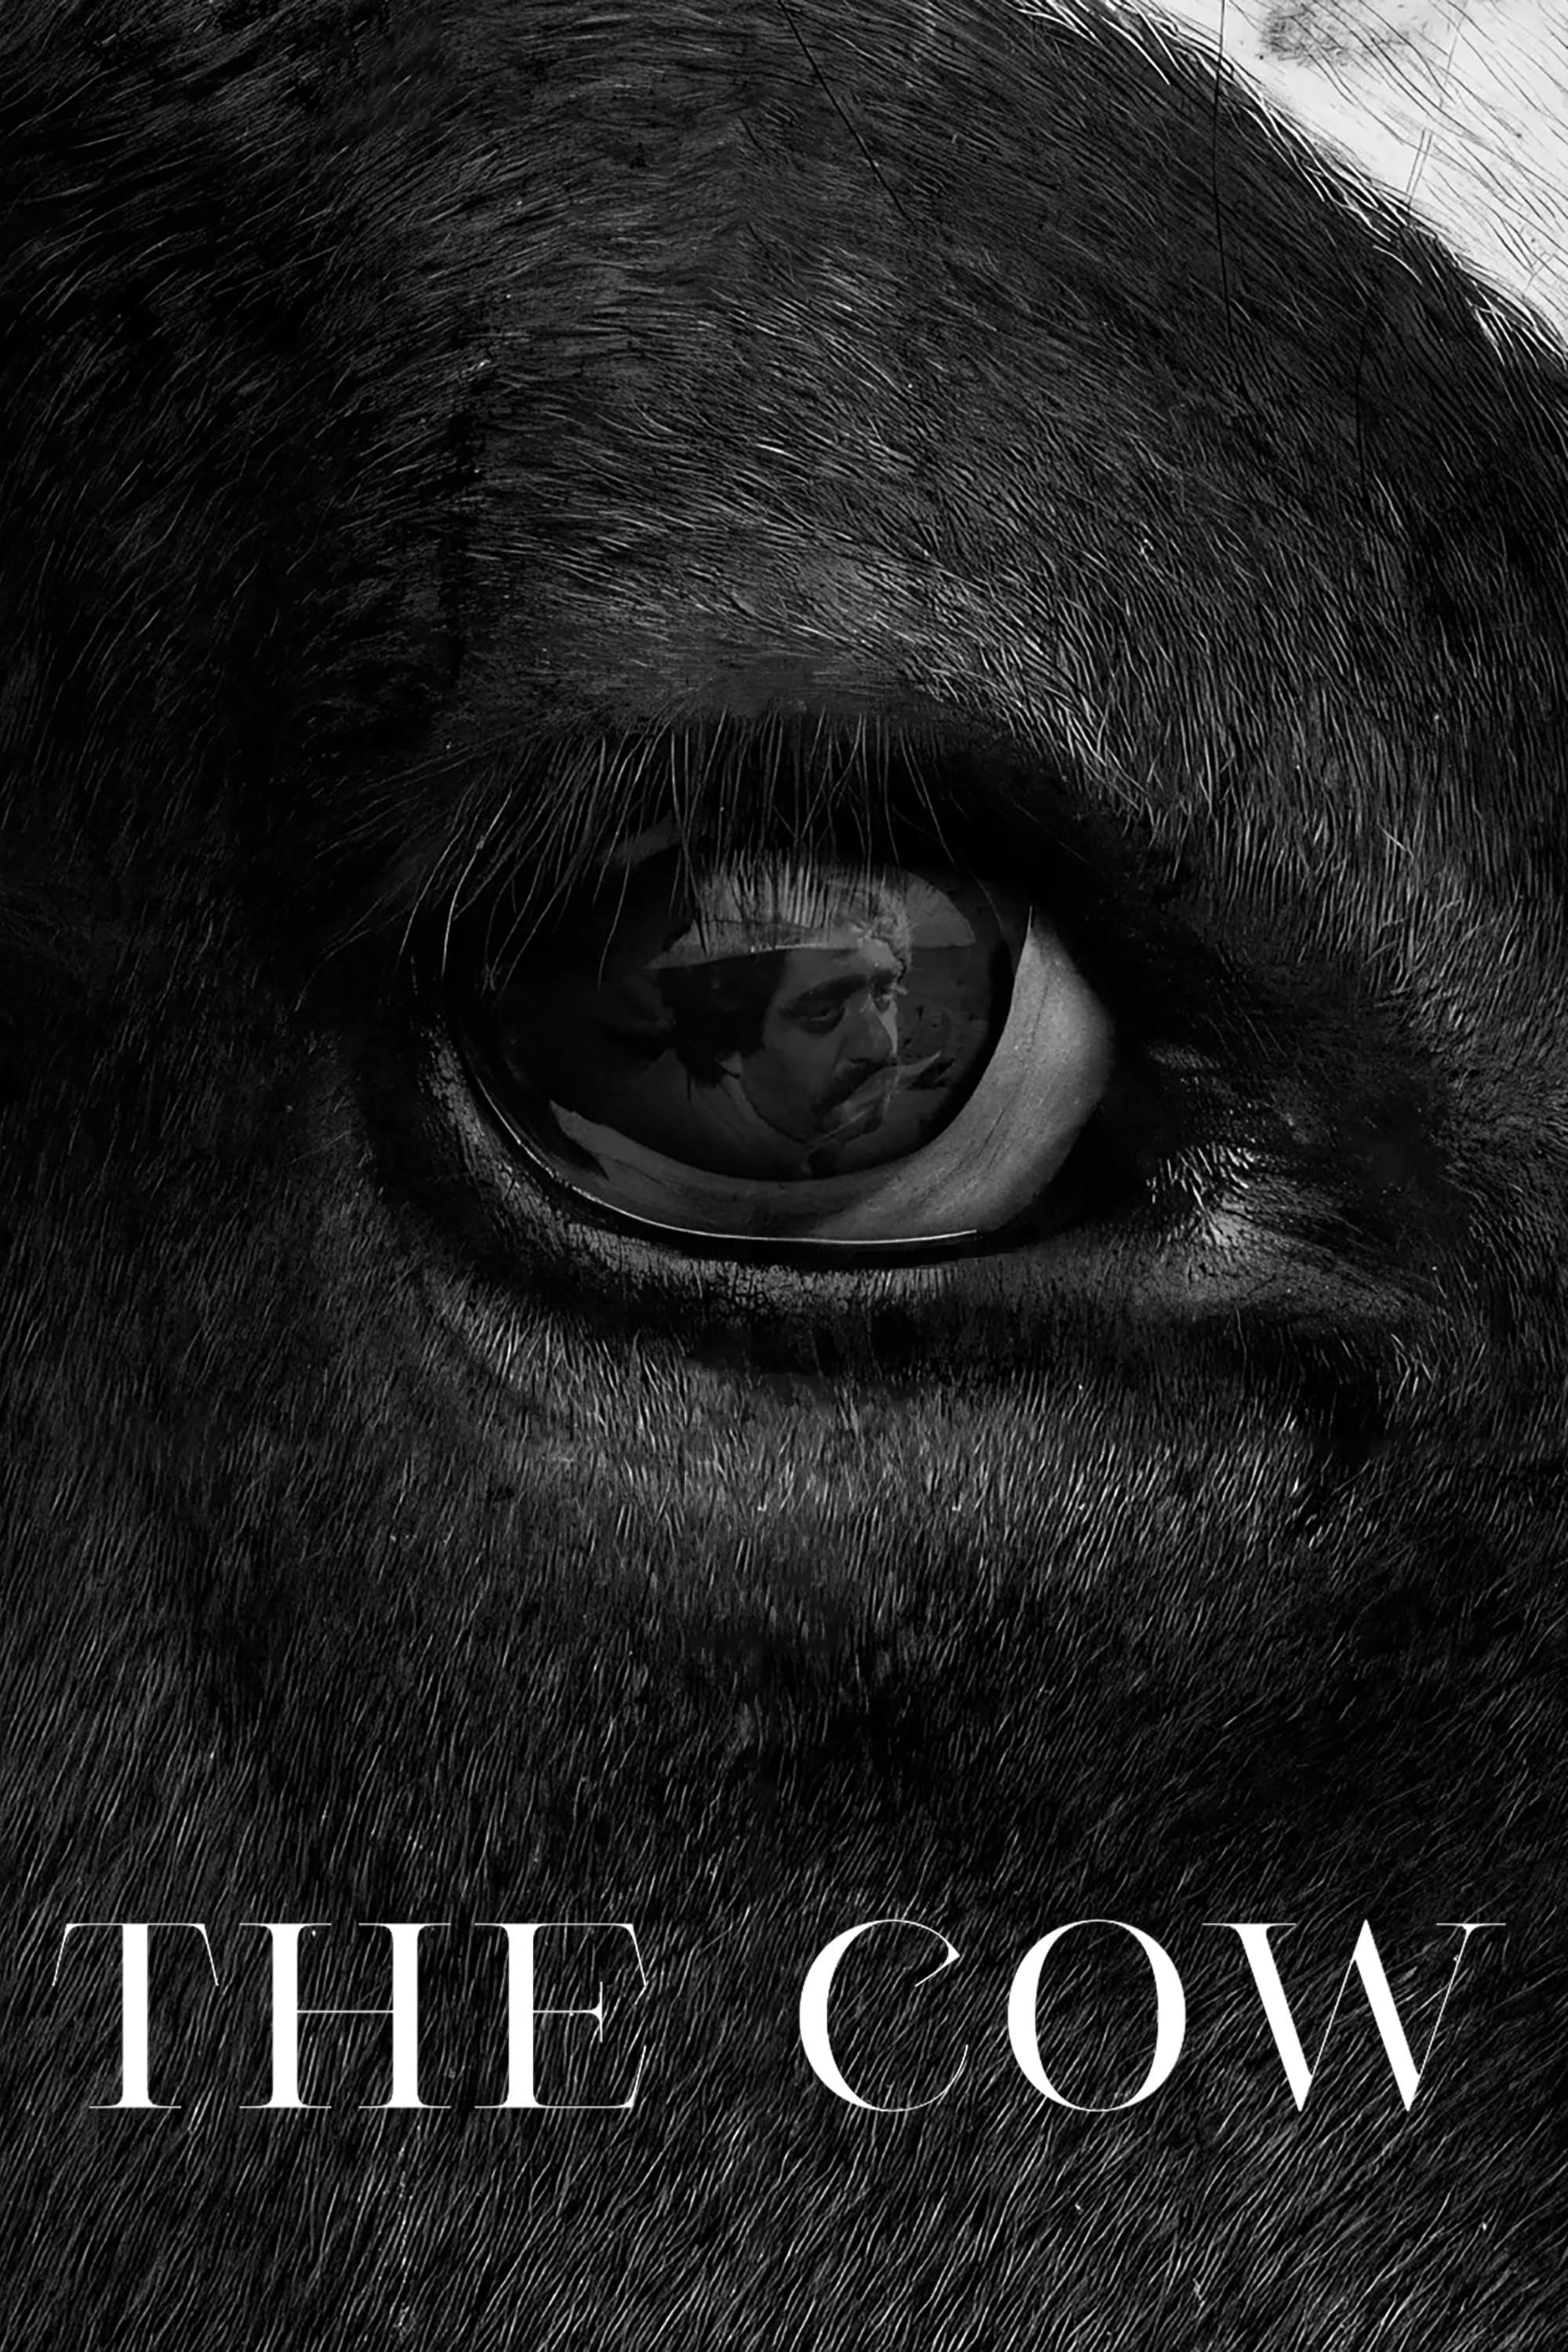 The Cow poster